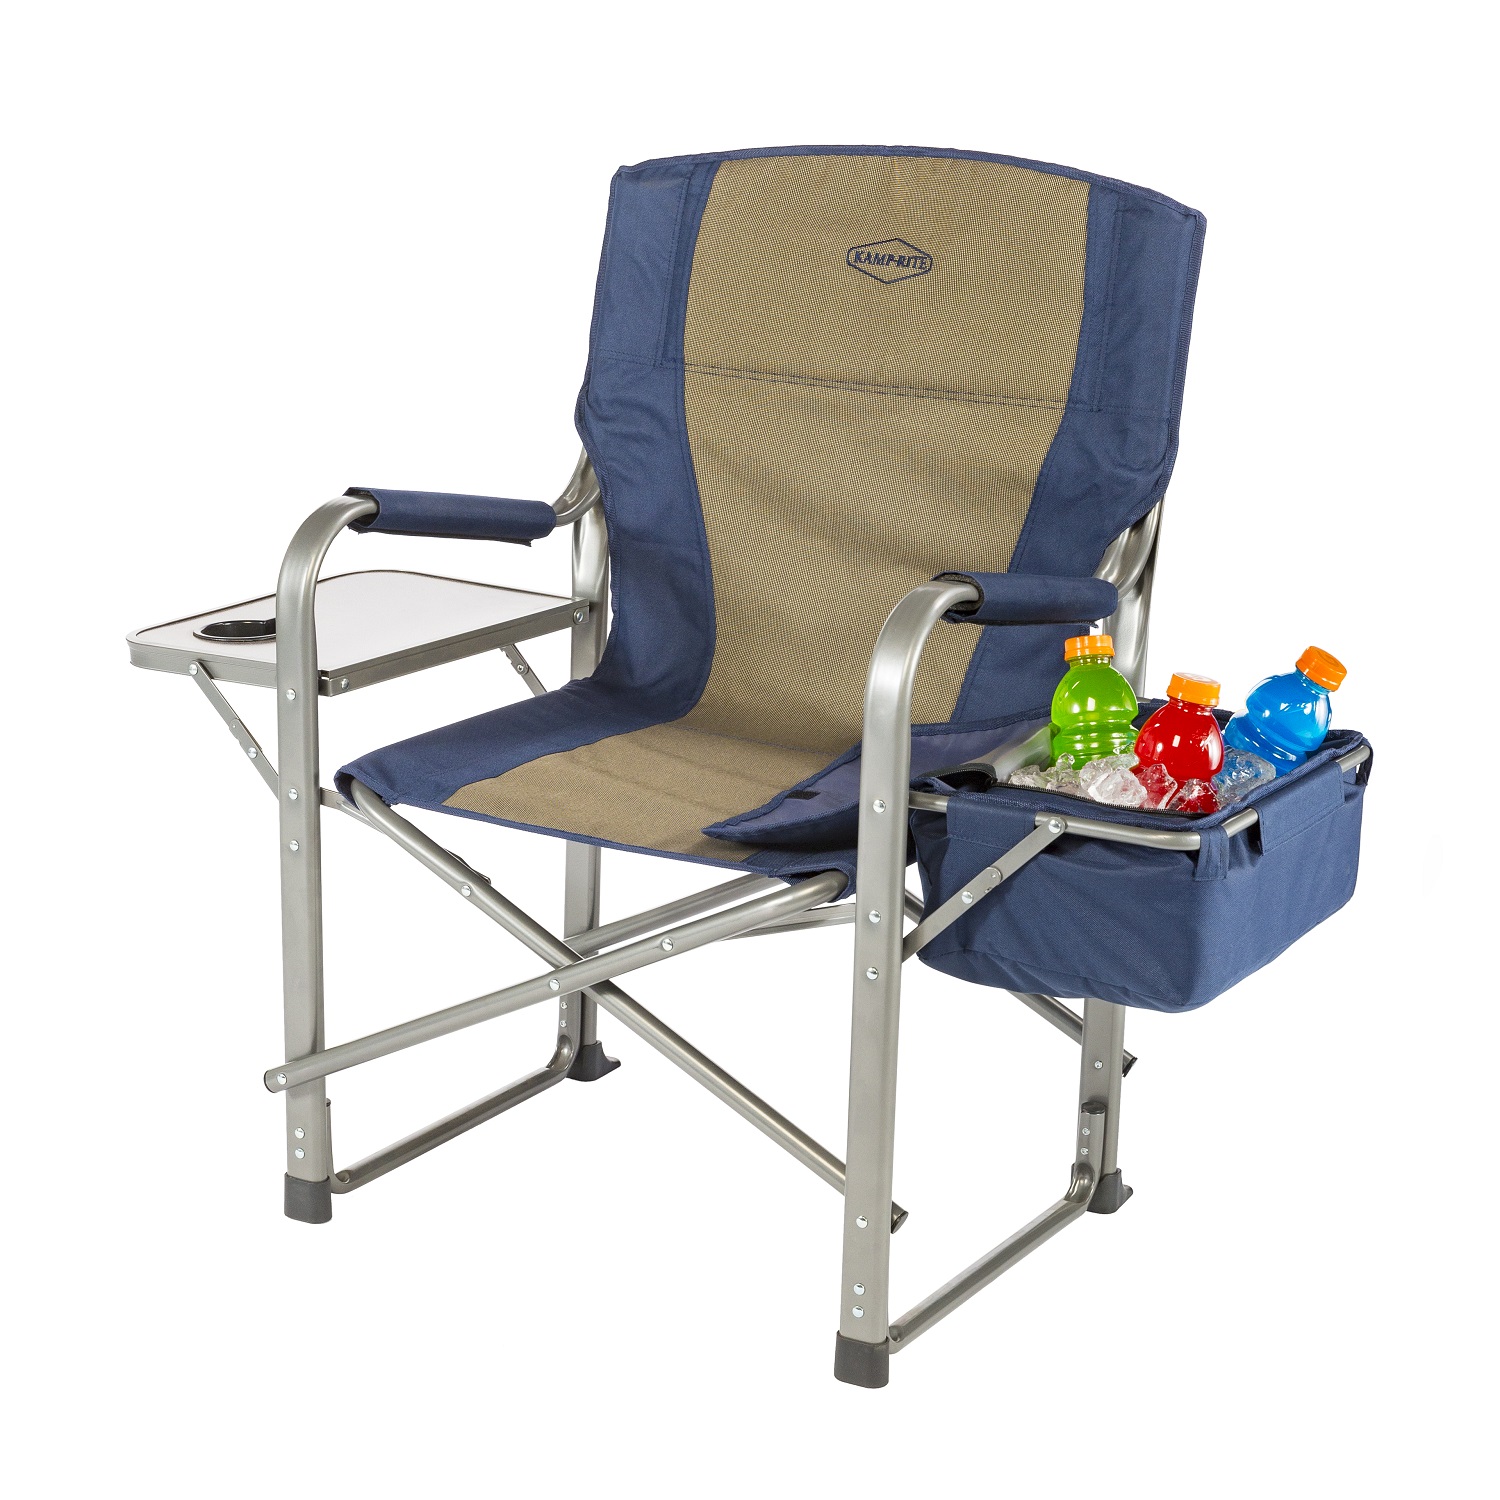 Kamp-Rite Director's Chair with Side Table and Cooler